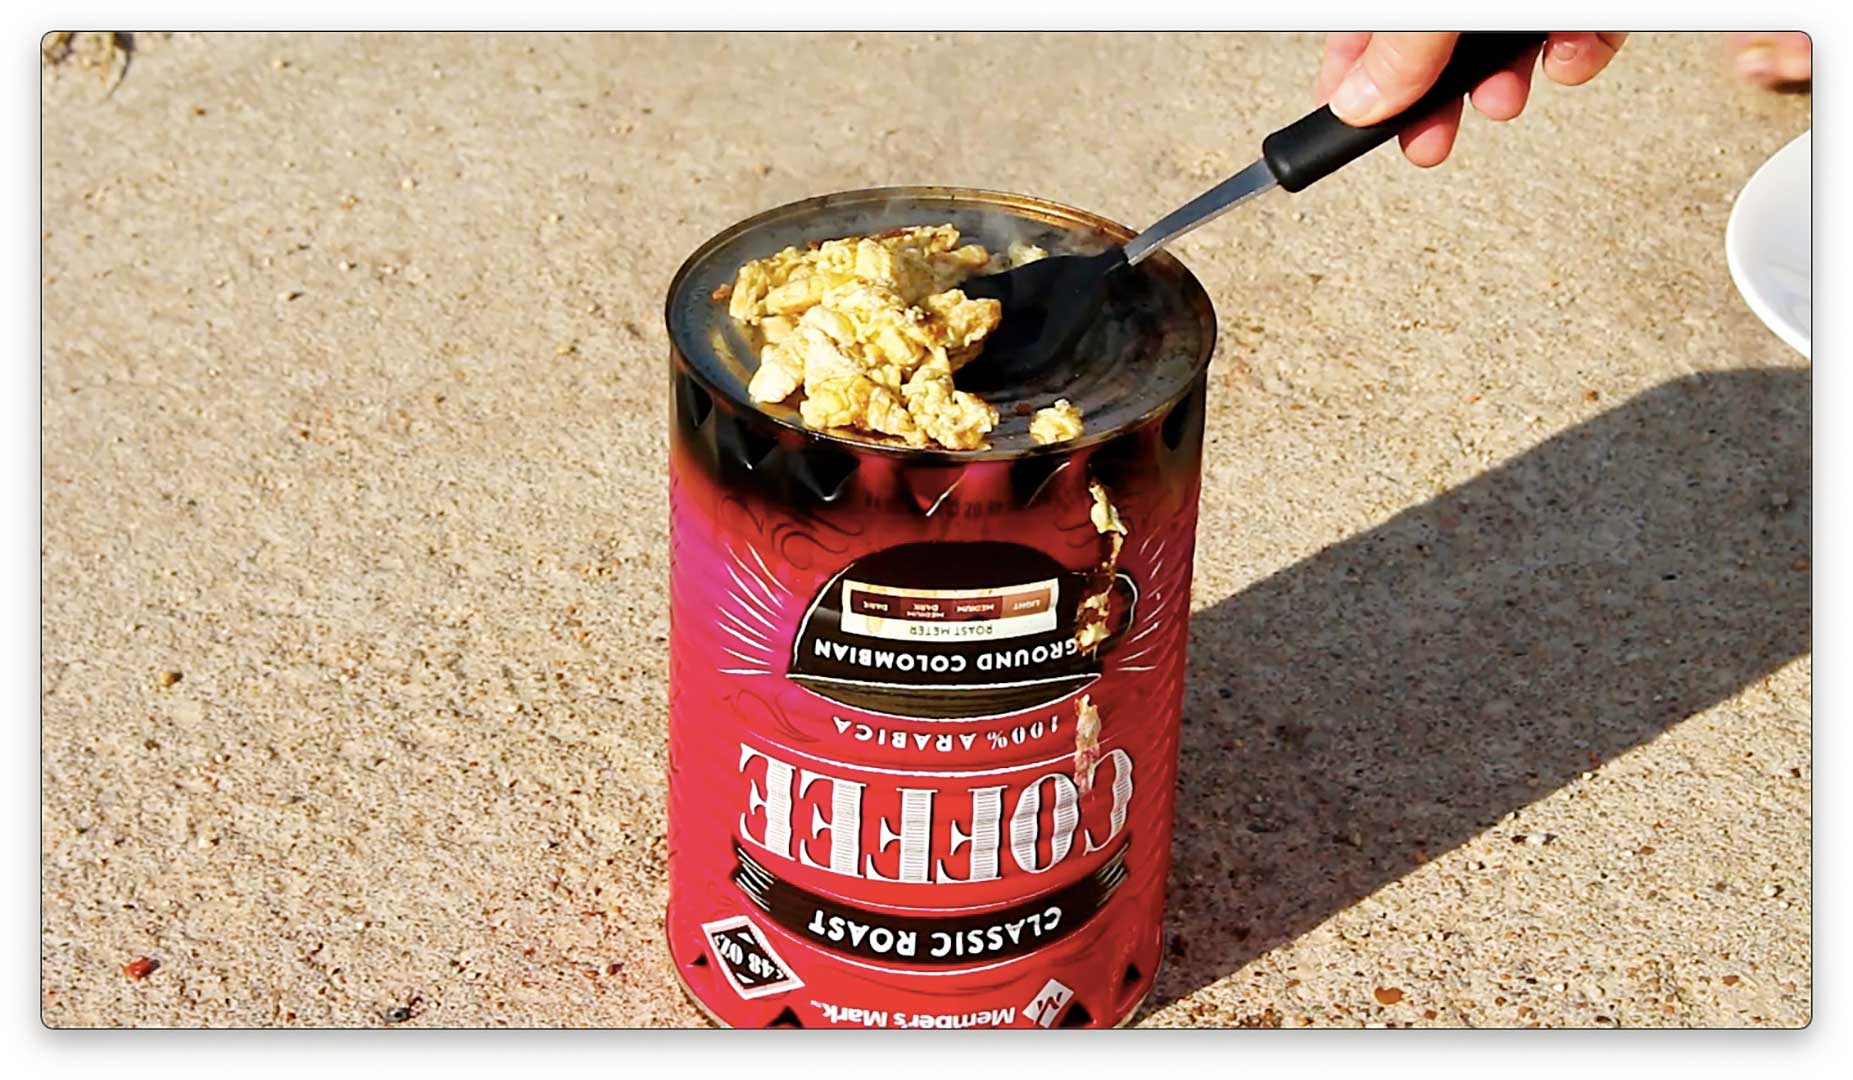 Someone cooking scrambled eggs on coffee can hobo stove.